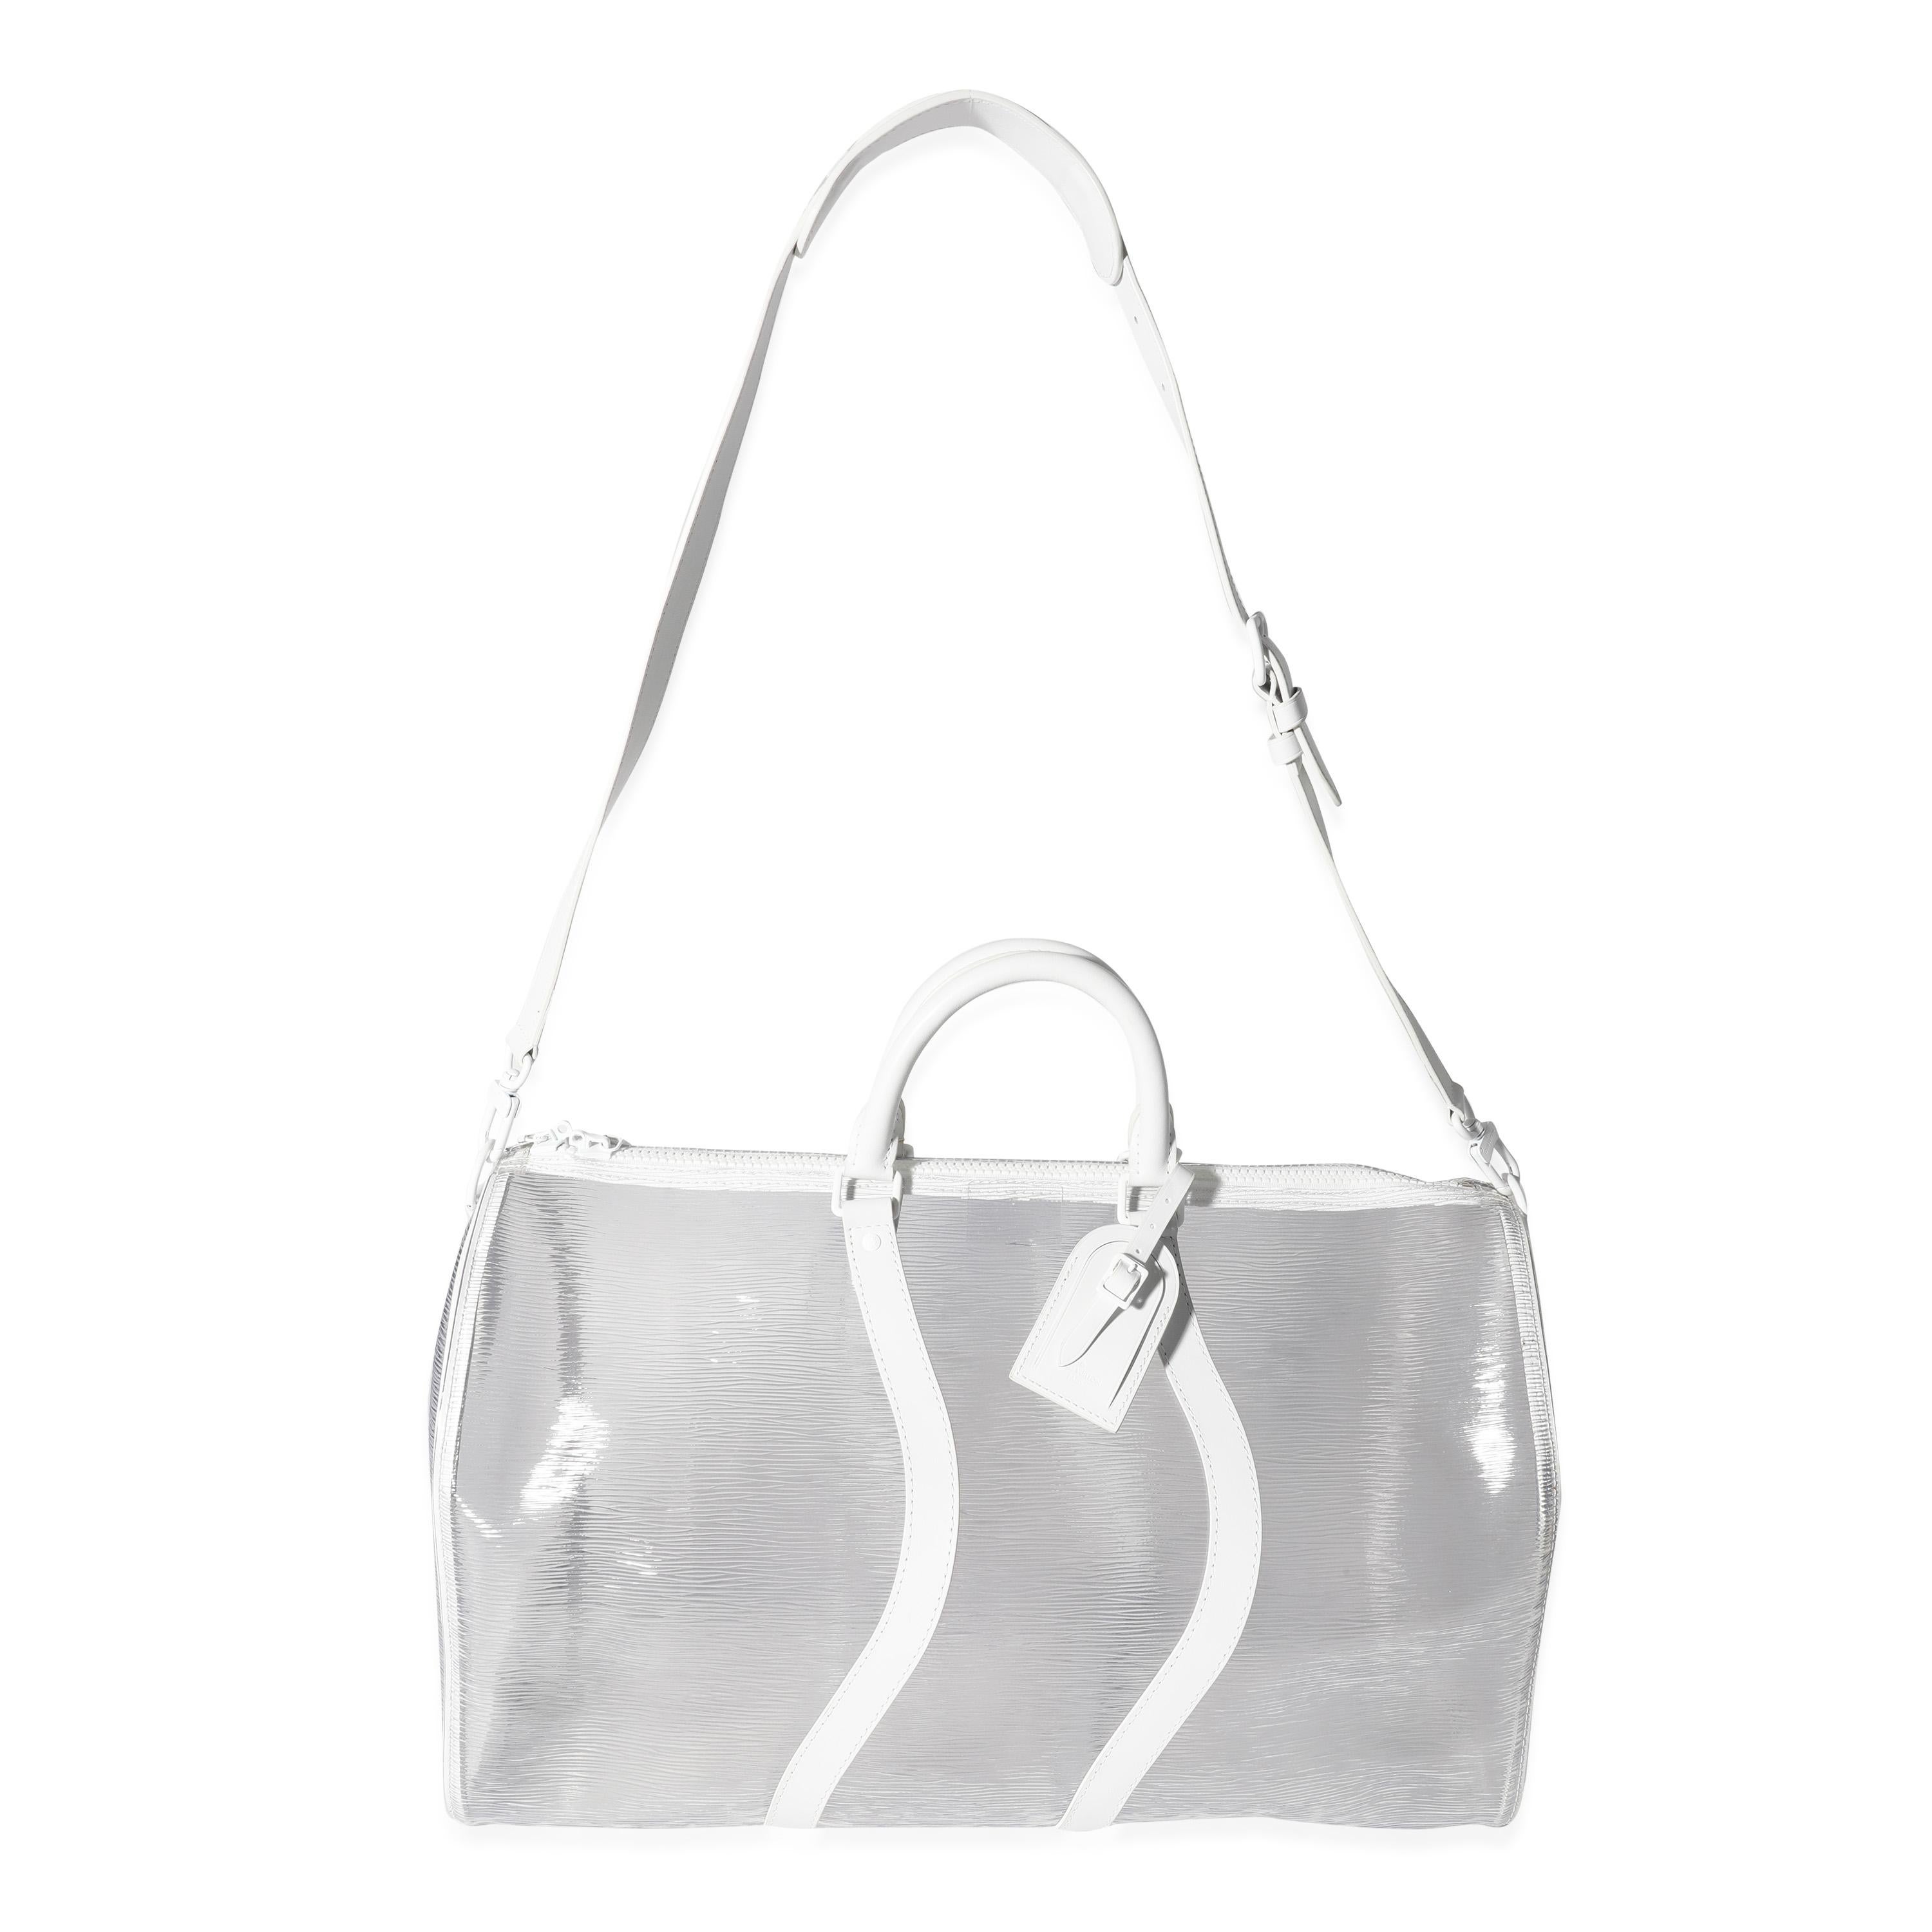 Listing Title: Louis Vuitton Clear Epi PVC Wavy Keepall Bandoulière 50
SKU: 119589
Condition: Pre-owned (3000)
Handbag Condition: Excellent
Condition Comments: Minor signs of use.
Brand: Louis Vuitton
Model: Wavy Keepall
Origin Country: